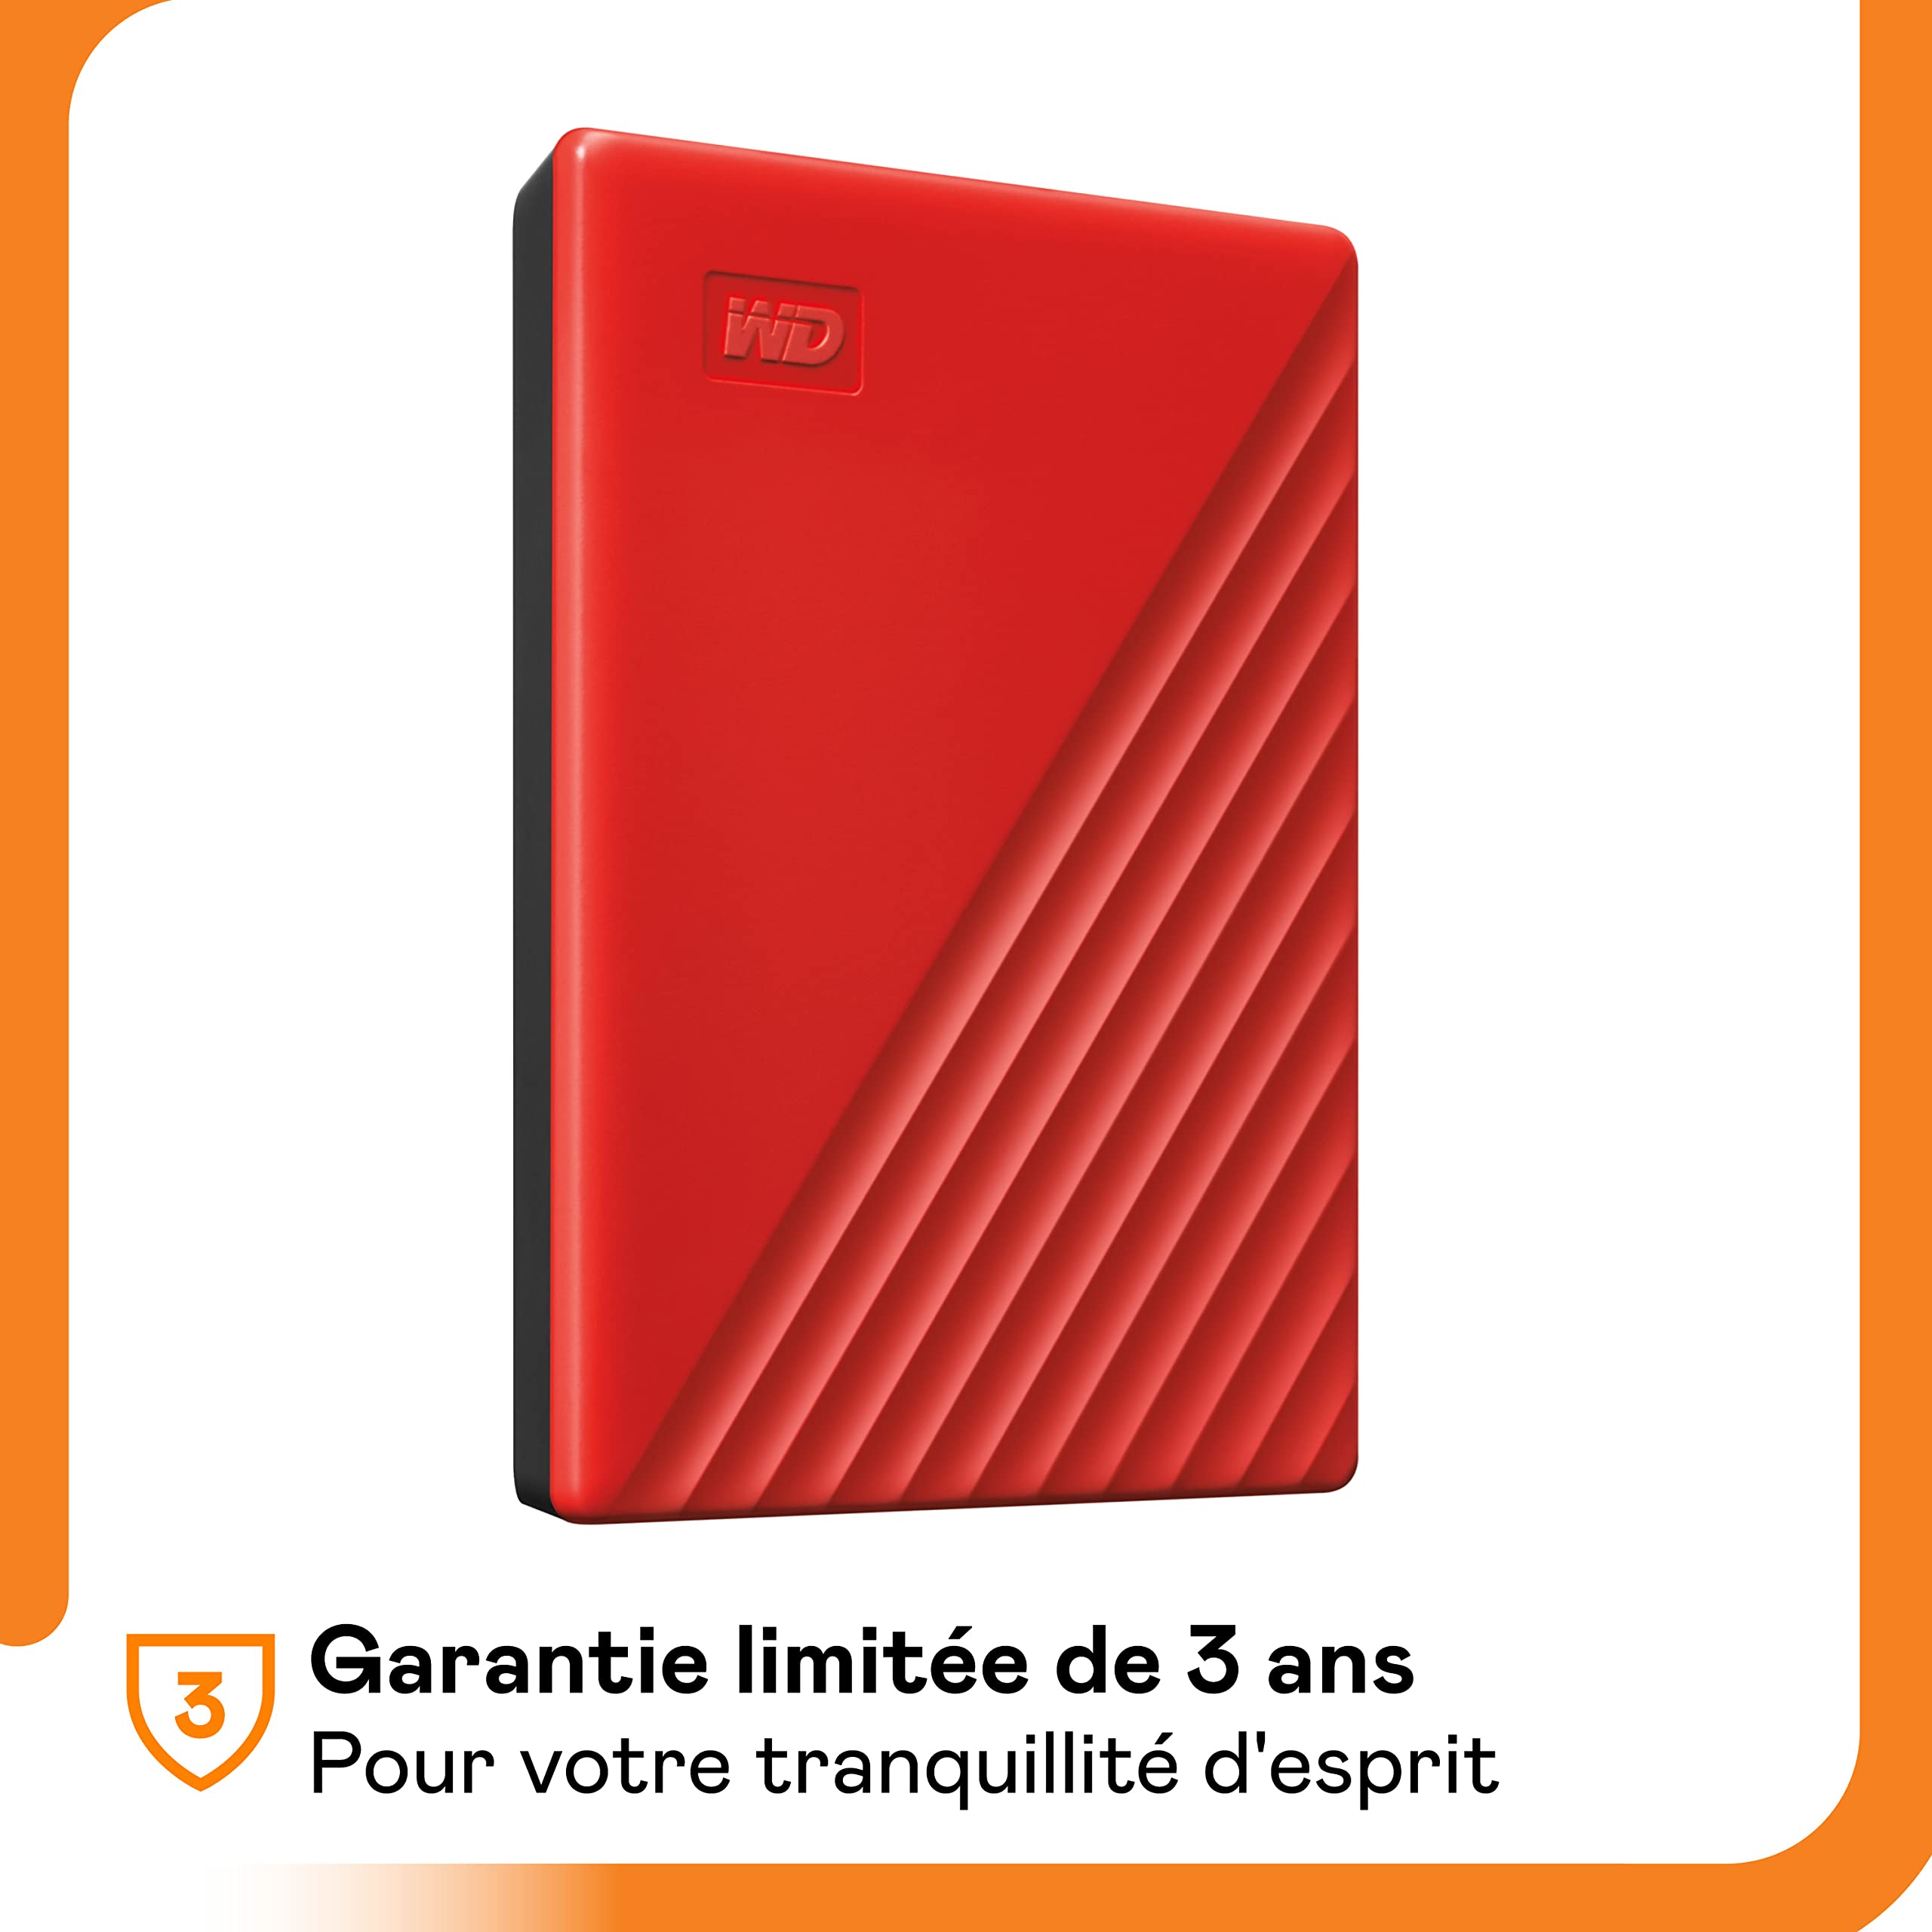 WD 2TB My Passport Portable External Hard Drive with backup software and password protection, Red - WDBYVG0020BRD-WESN